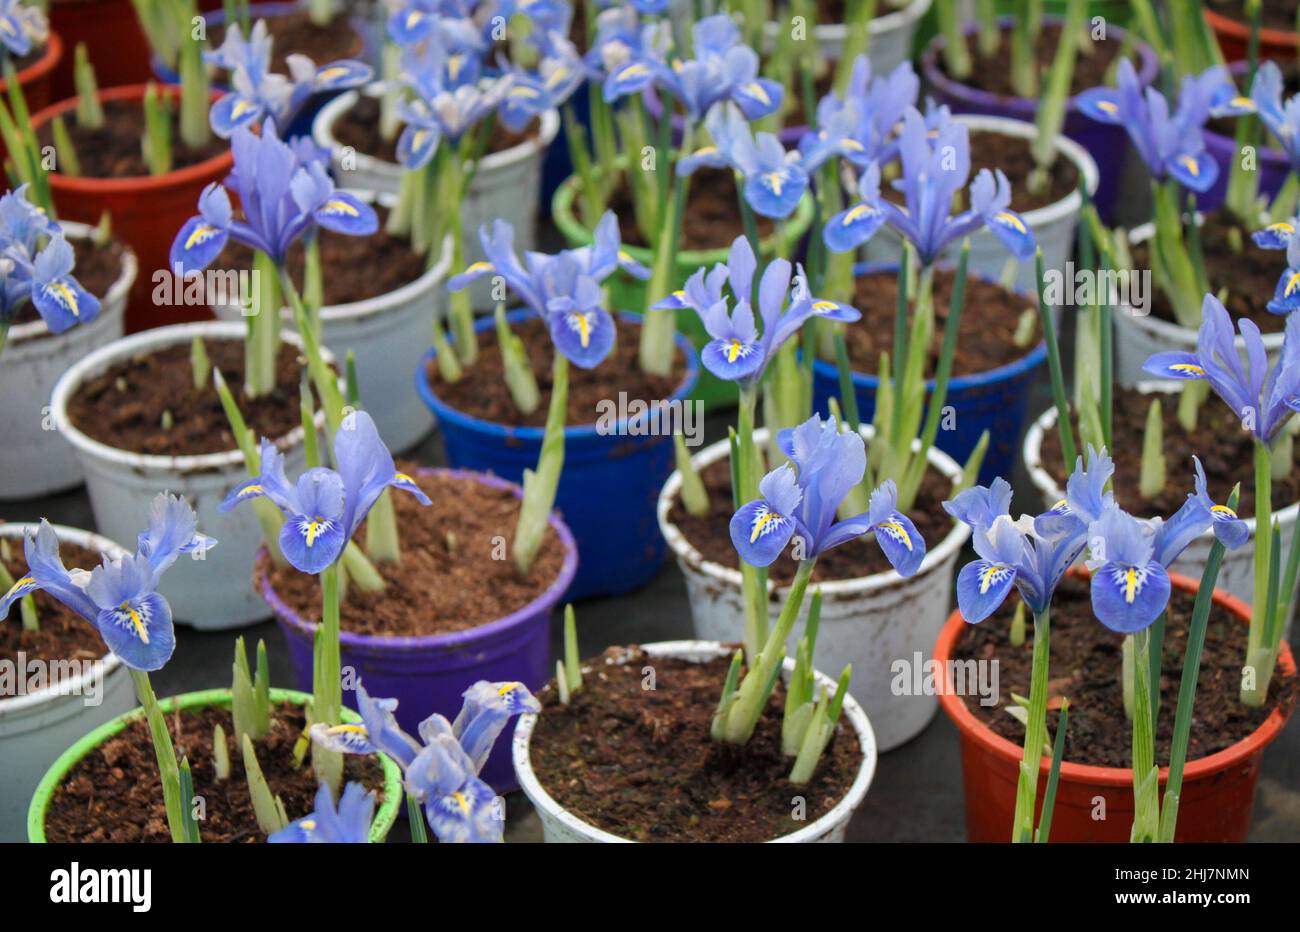 Small iris sprouts with soft blue flowers in pots in the greenhouse for sale. Stock Photo